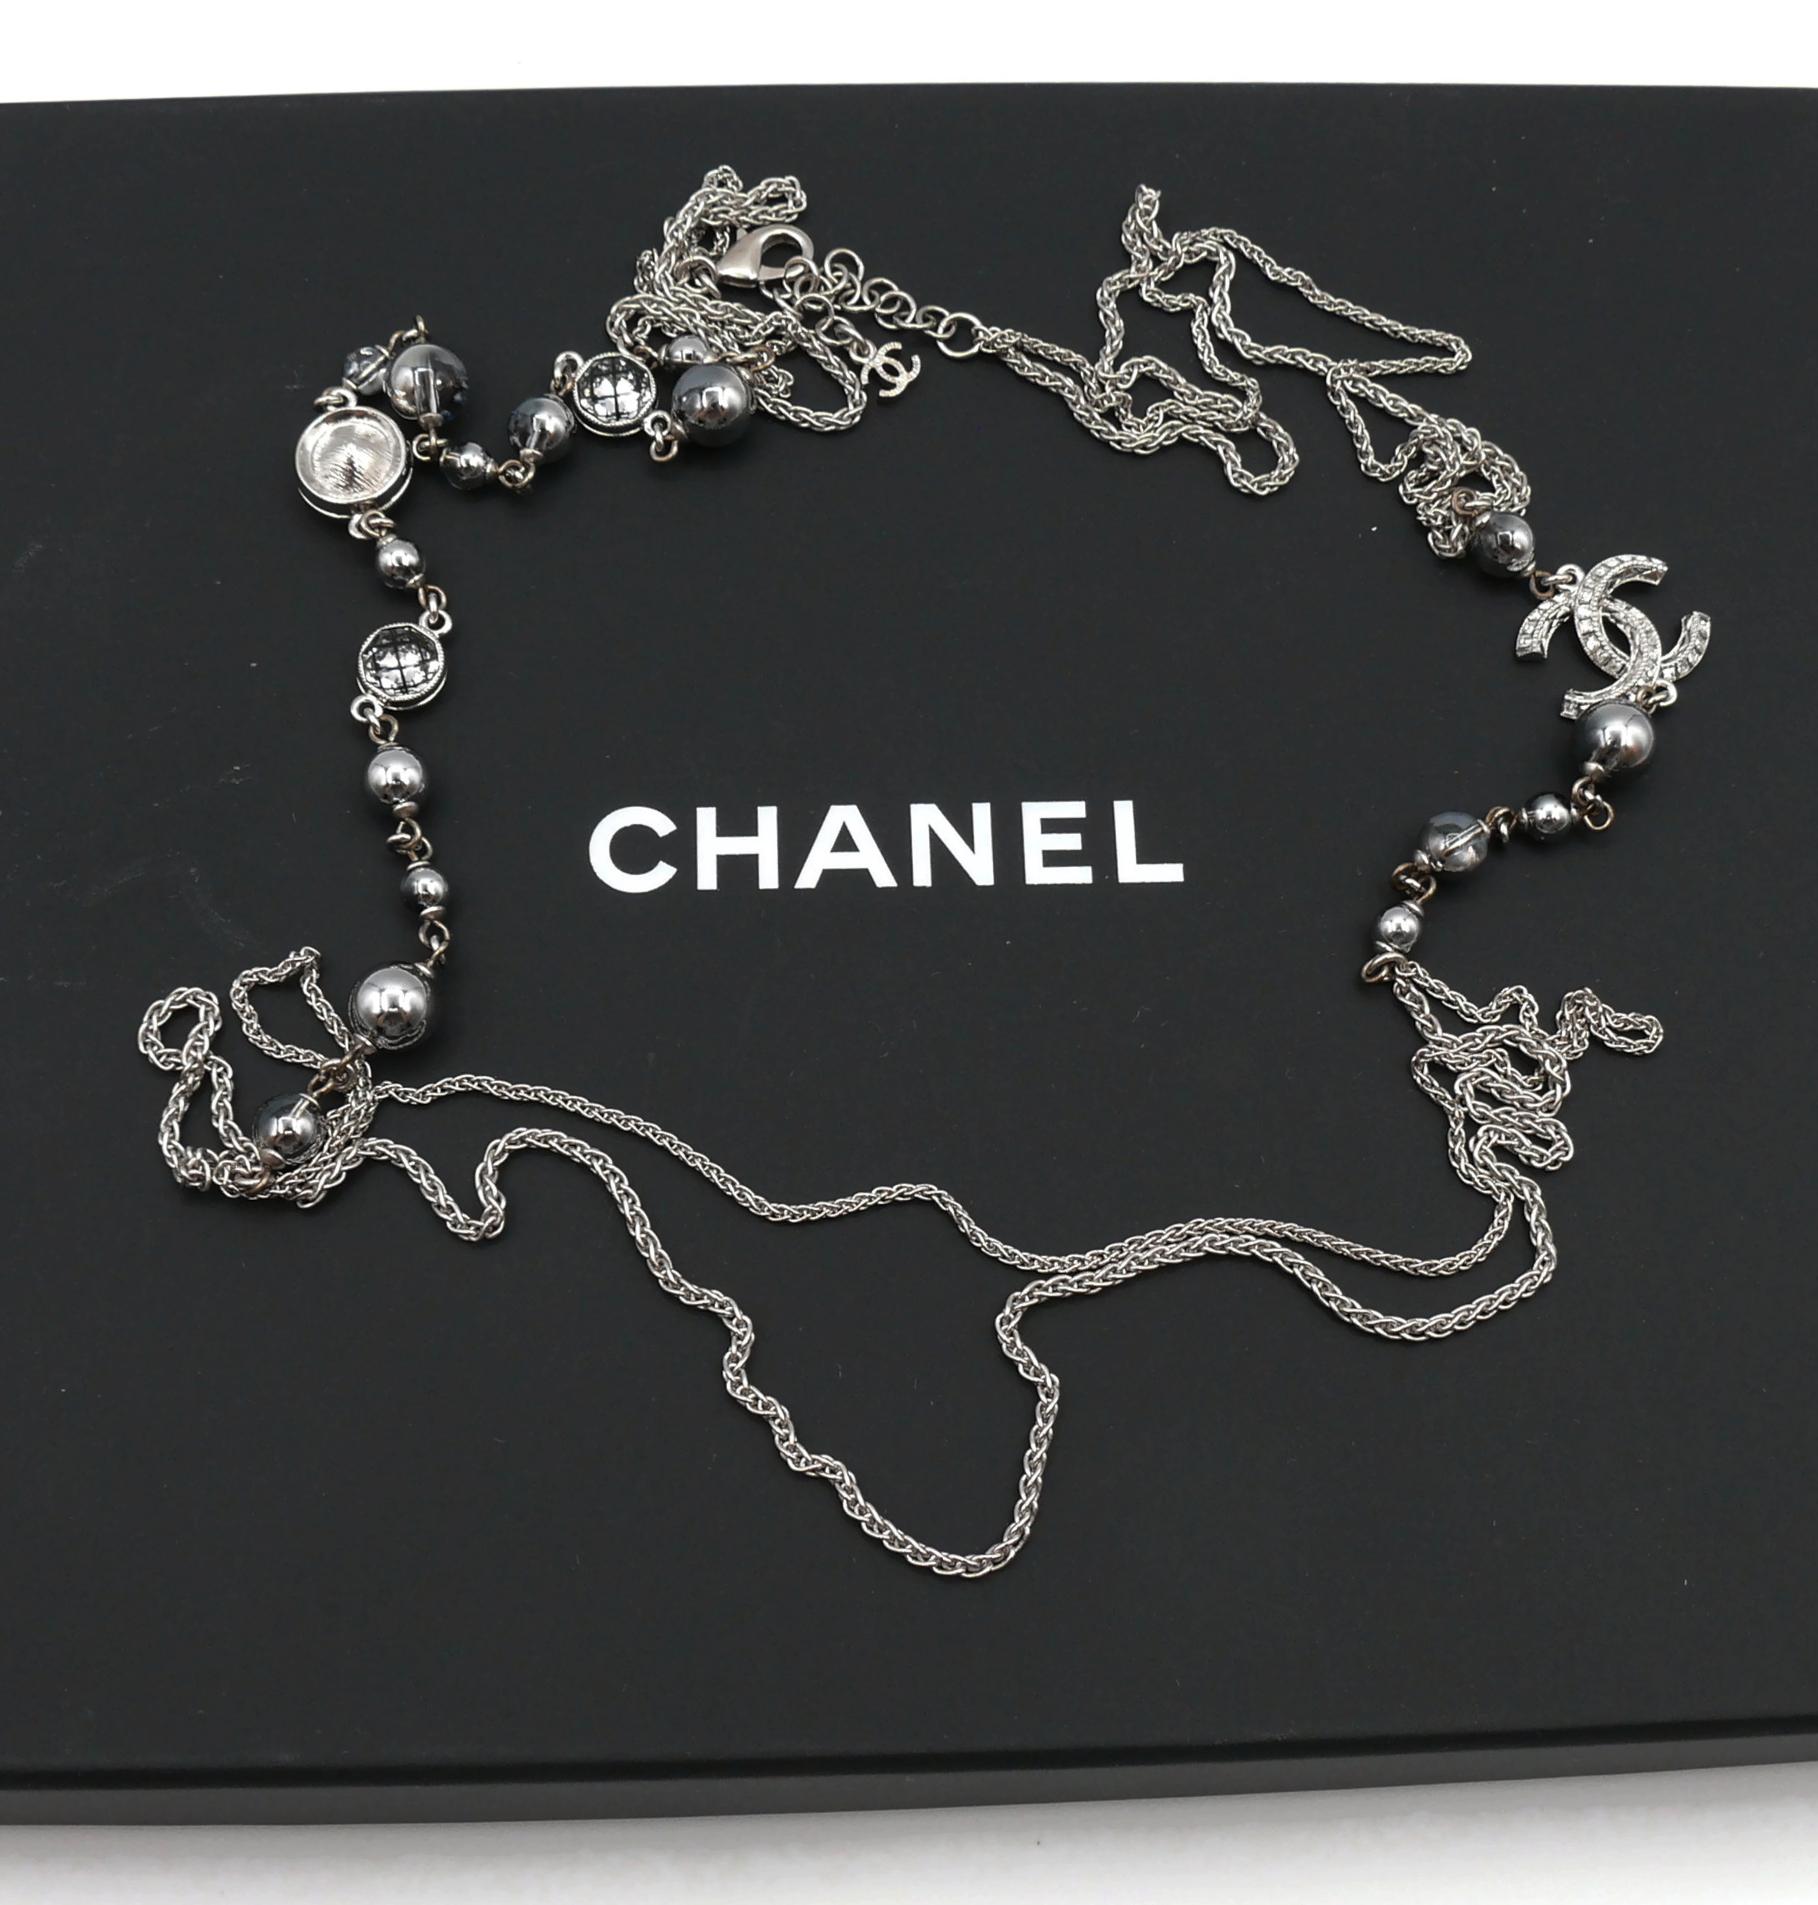 CHANEL by KARL LAGERFELD Jewelled CC Silver Tone Chain Necklace, 2018 In Excellent Condition For Sale In Nice, FR